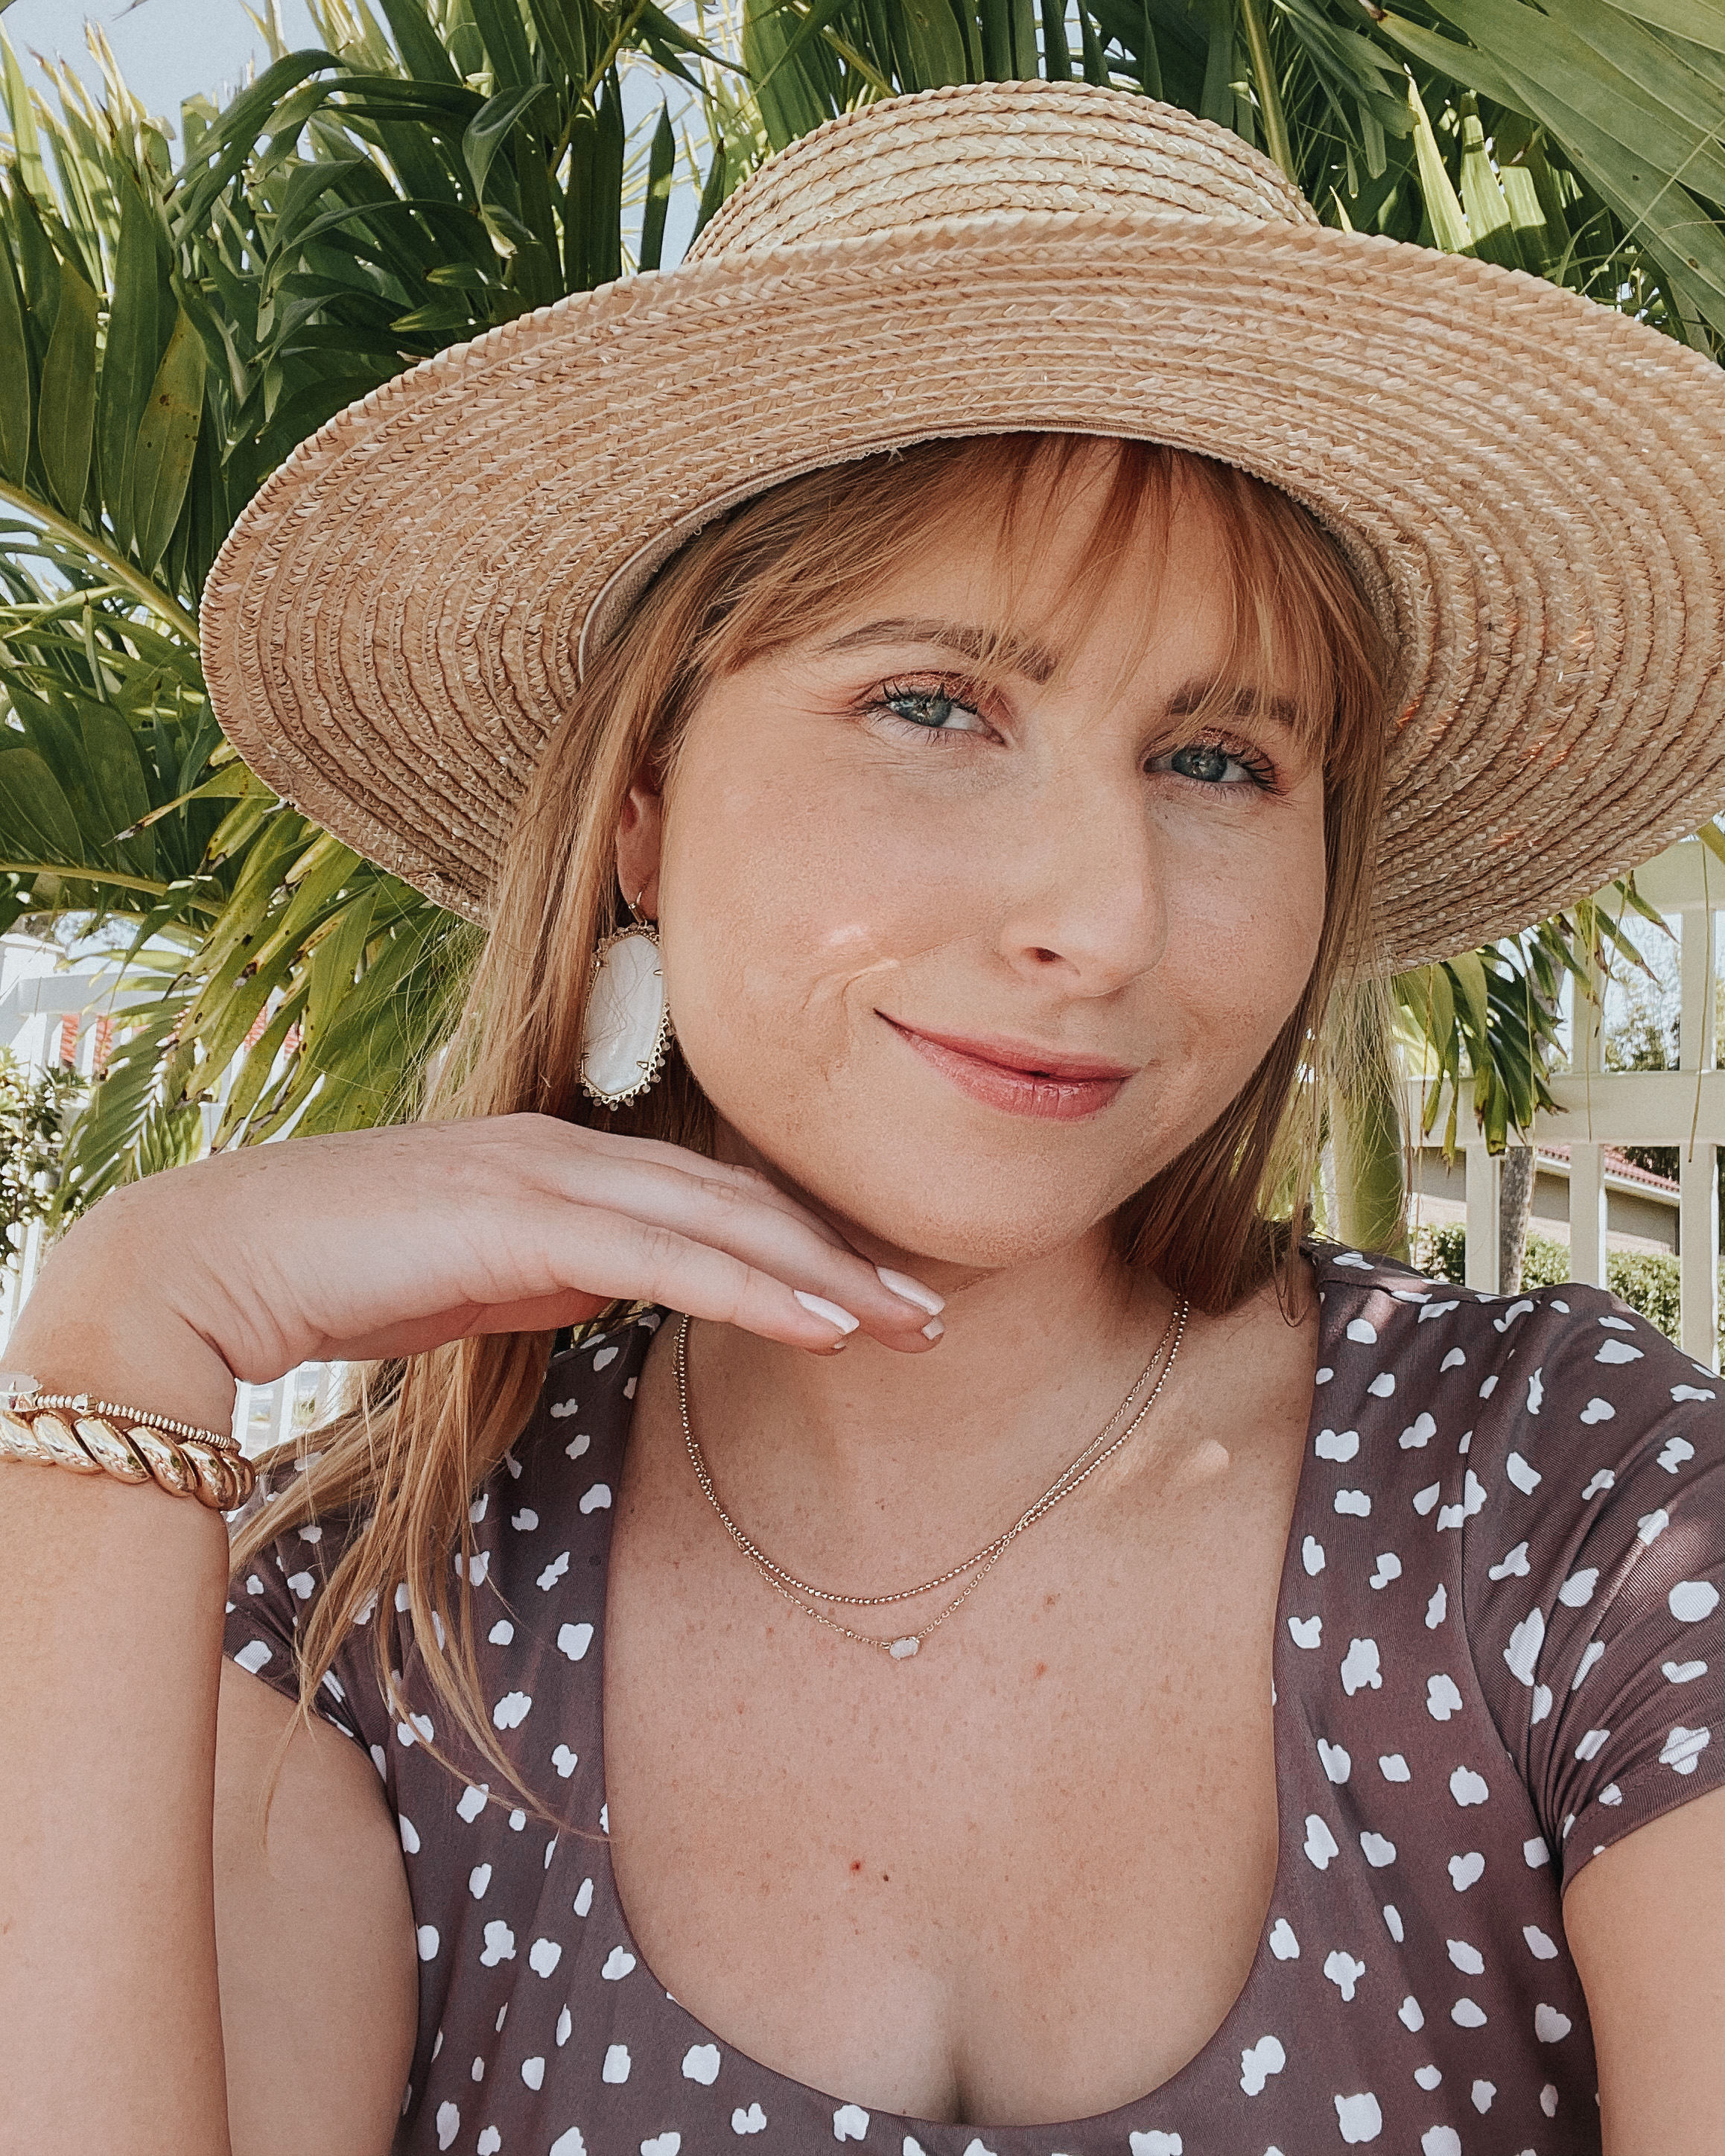 Amanda Burrows of Affordable by Amanda shares her May favorites, including the Beaded Danielle Gold Drop earrings from Kendra Scott. She is wearing a beige sun hat and charcoal gray polka dot bathing suit top.